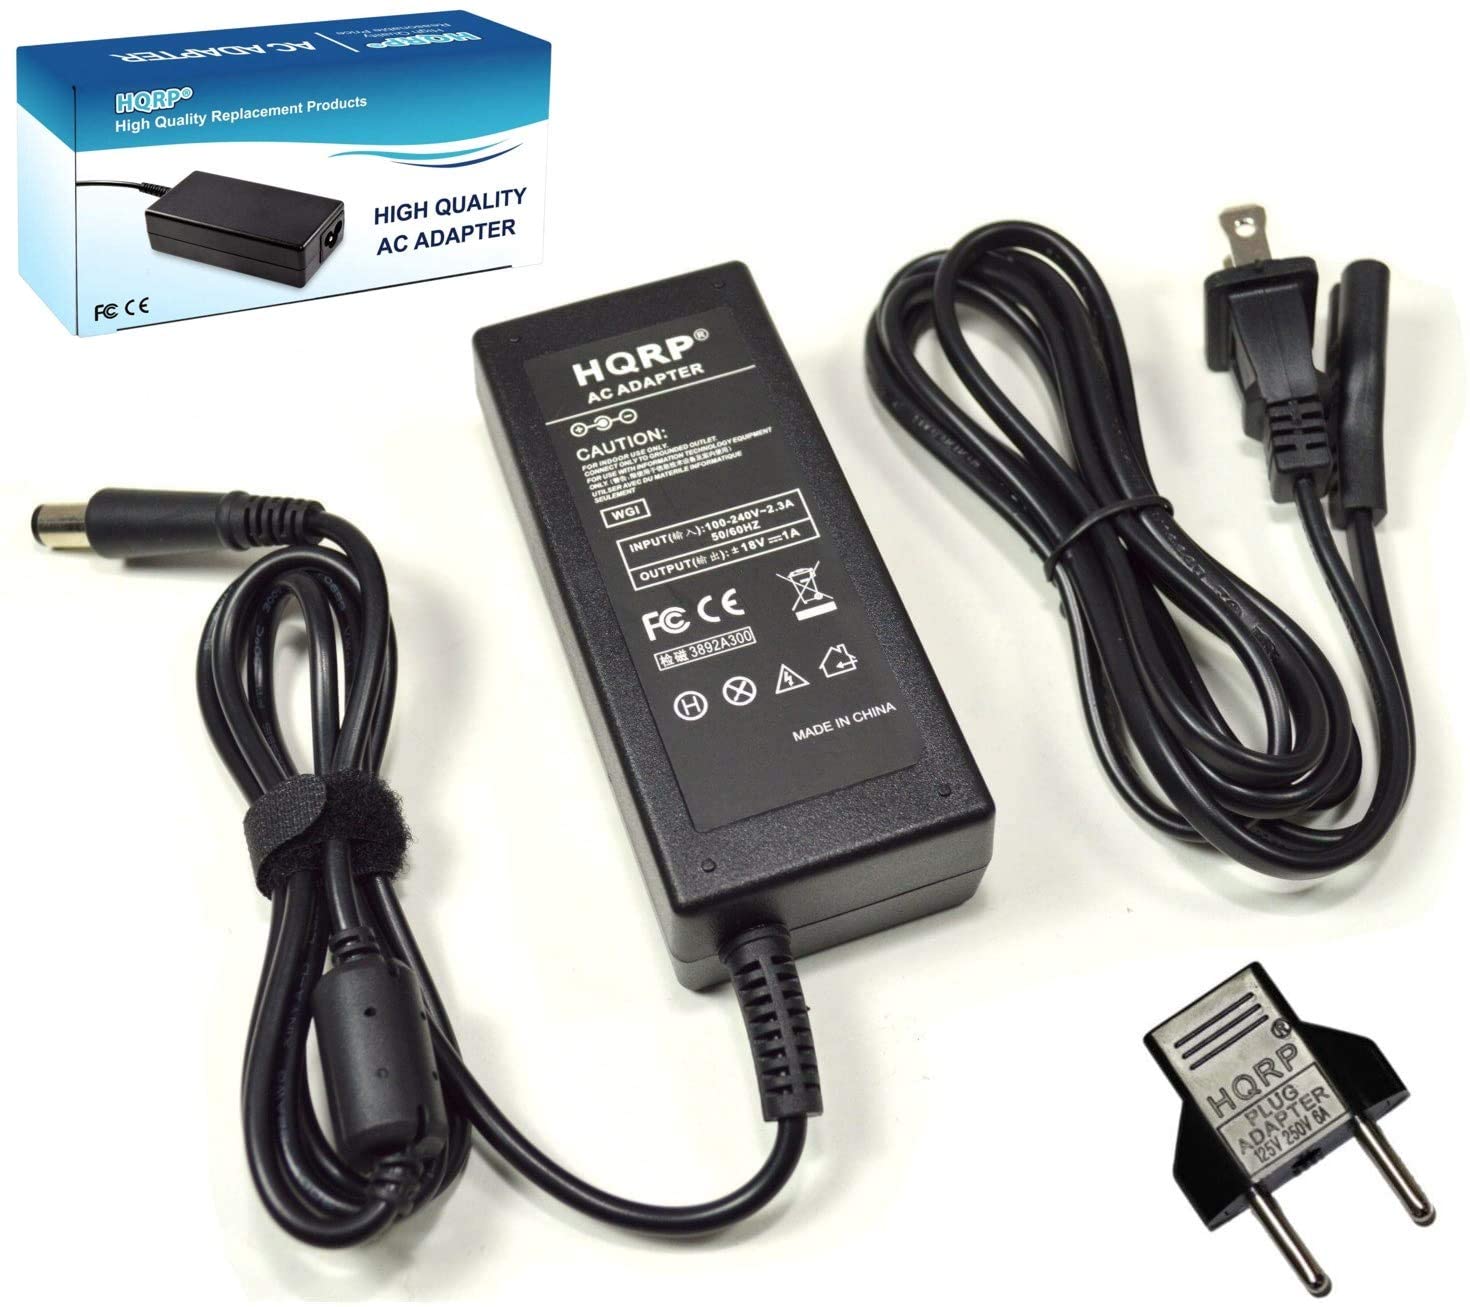 HQRP +/-18V AC Adapter for SoundDock Series 3 III 310583-1130 Digital Music System PCS36W-208 Wireless Speaker Power Supply Cord plus HQRP Euro Plug Adapter - image 1 of 8